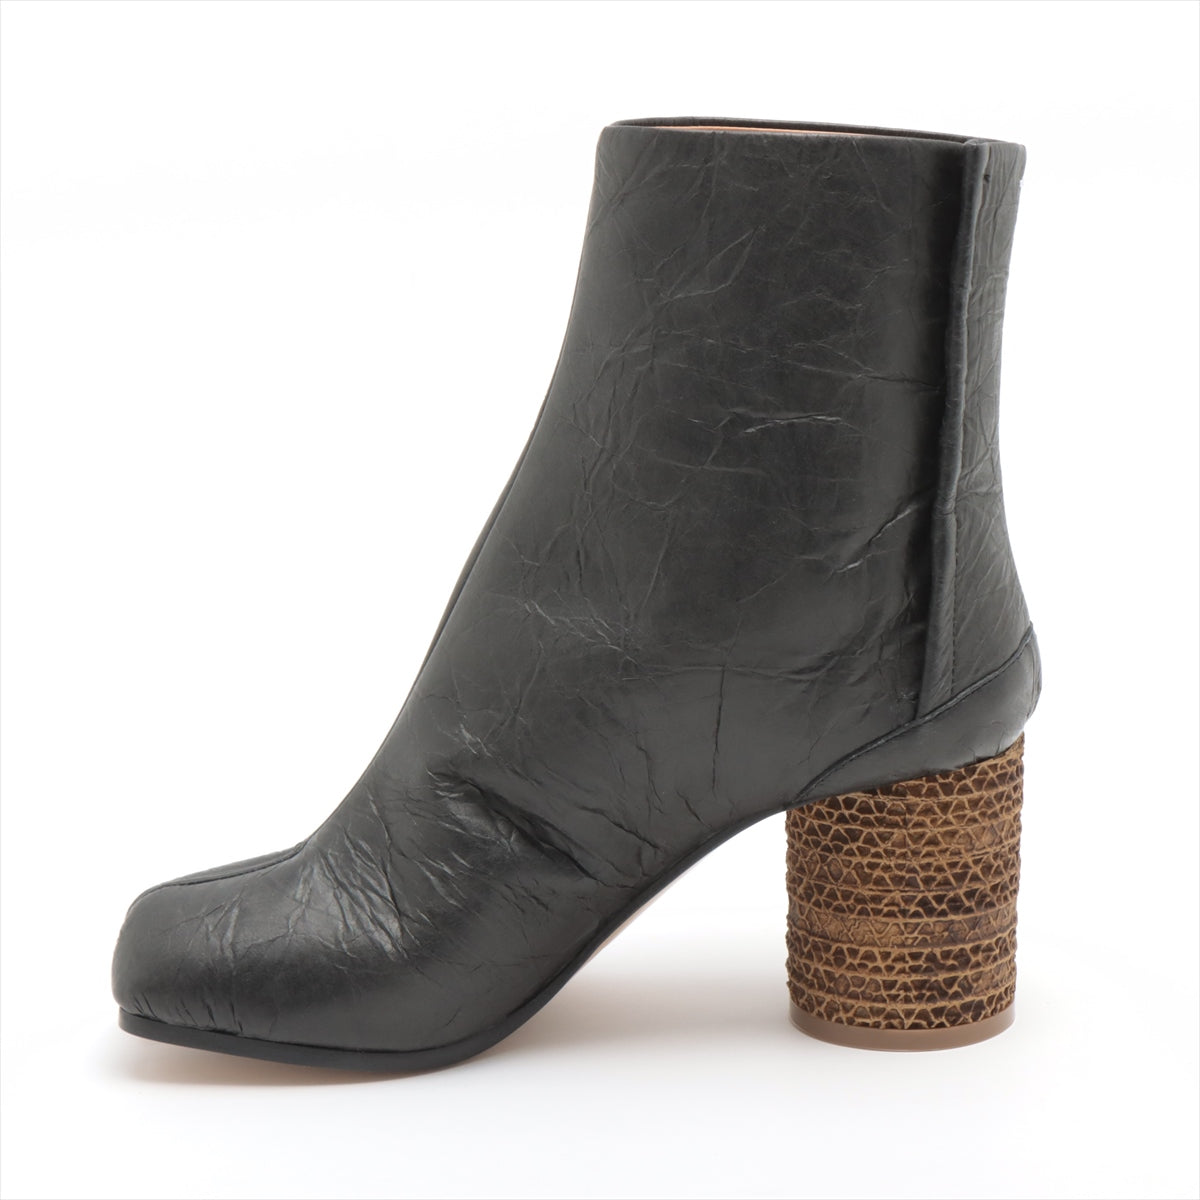 Maison Margiela TABI Leather Short Boots 36 1/2 Ladies' Black S58WU0381 Wrinkle processing 22 box There is a bag